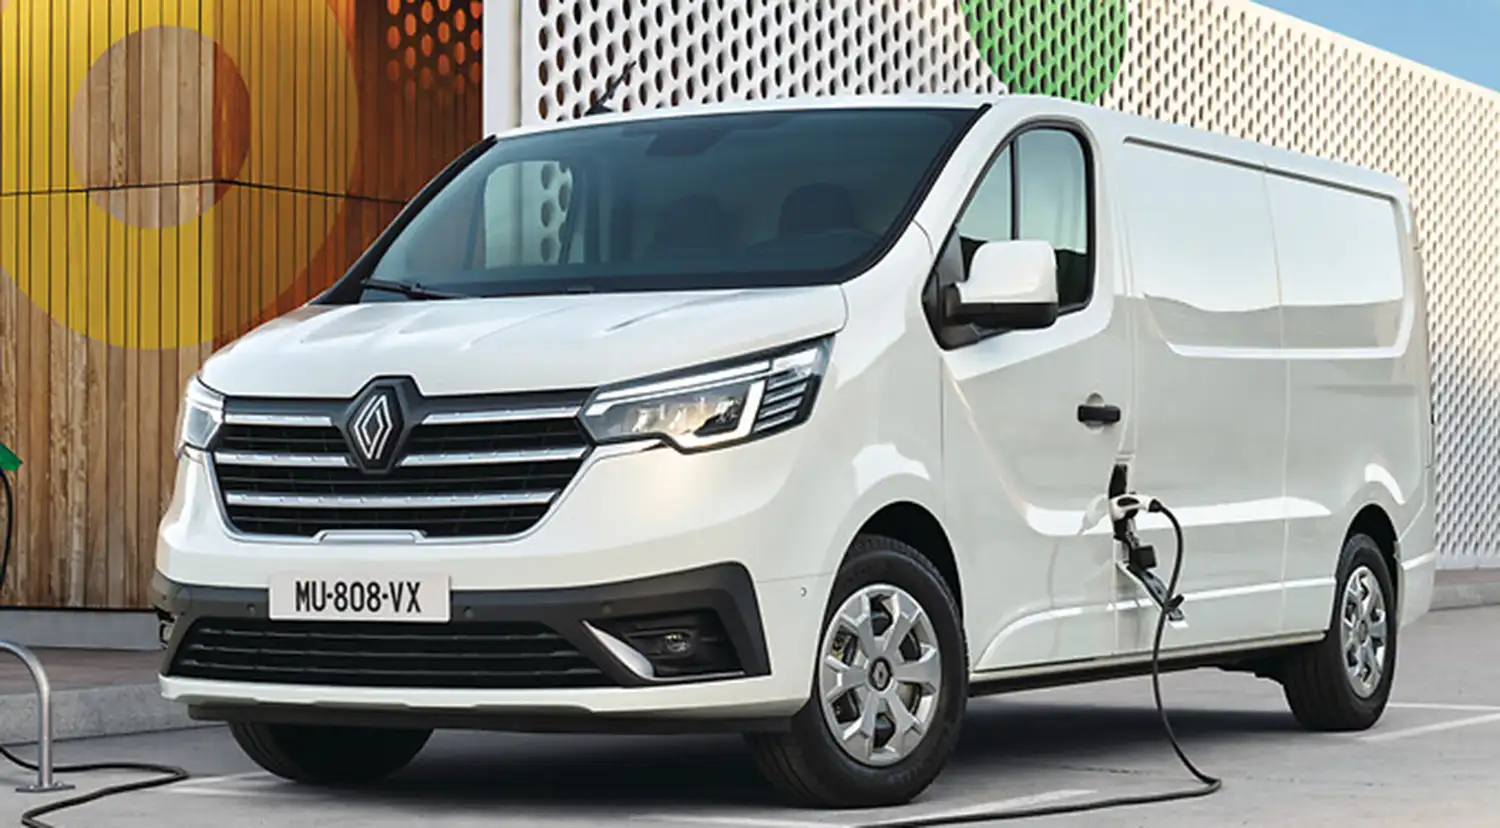 Renault Trafic E-Tech Electric - Pricing And Specification